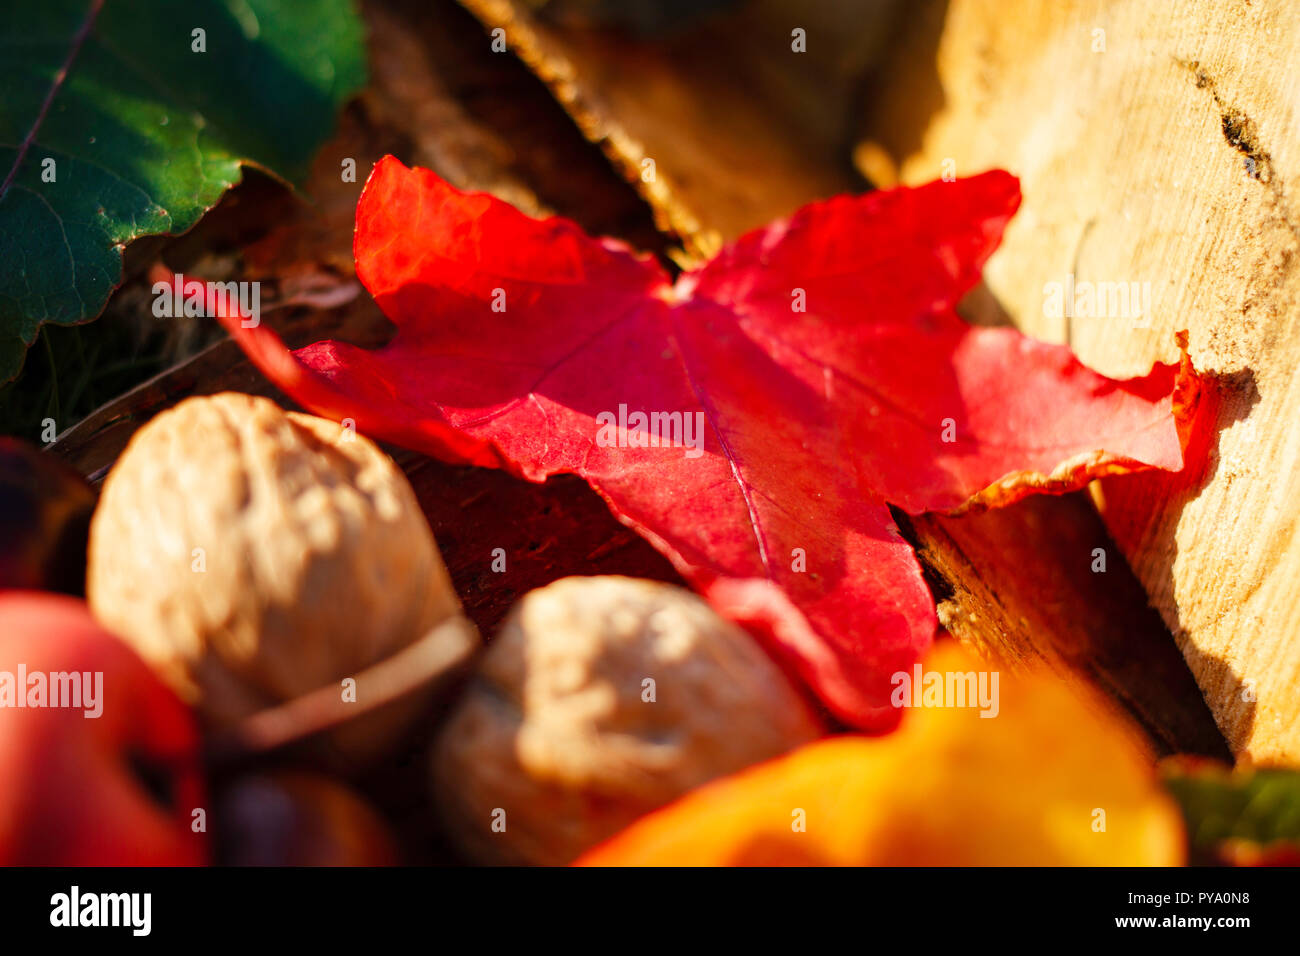 Image of a red maple leaf with walnuts, crab apple and wooden log in an autumnal still life. Stock Photo